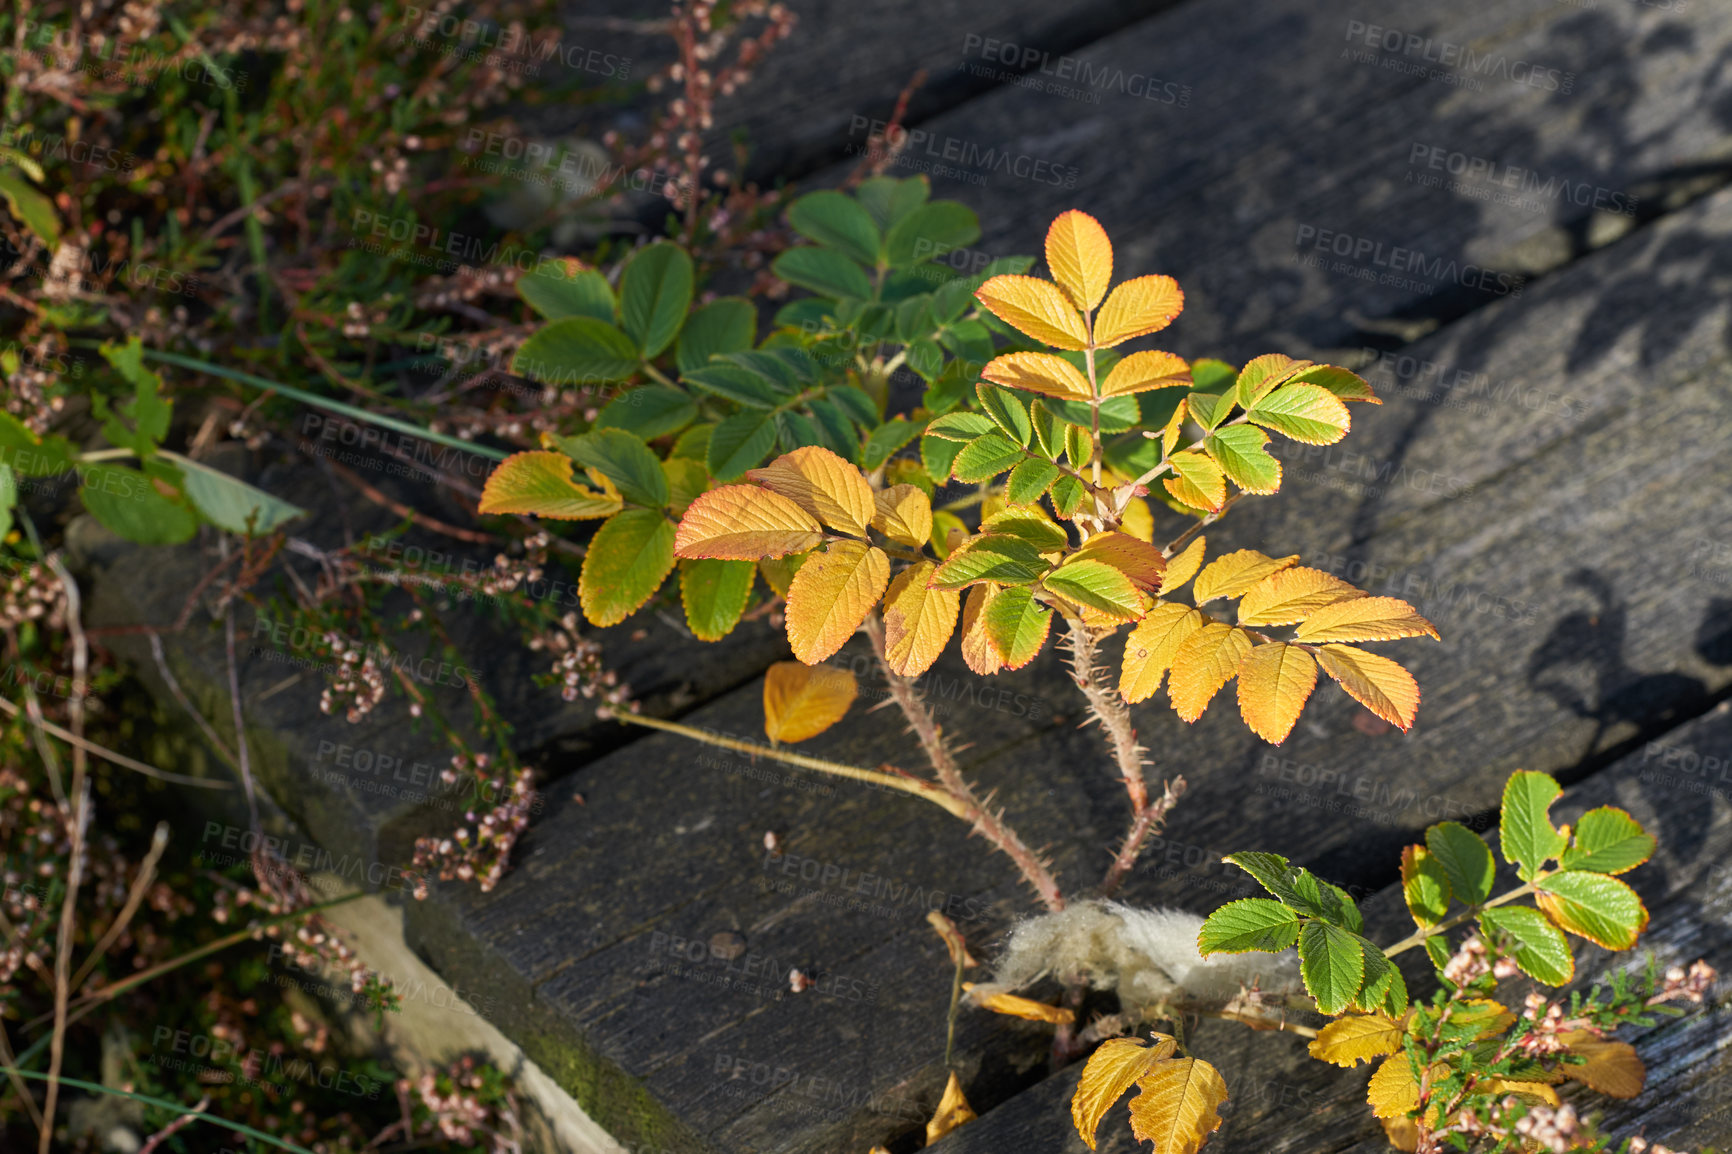 Buy stock photo Closeup of a plant with autumn colors on a terrace. Beautiful green and golden or yellow leaves growing outdoors under bright sunlight. Thorny plants and branches on the ground during fall season